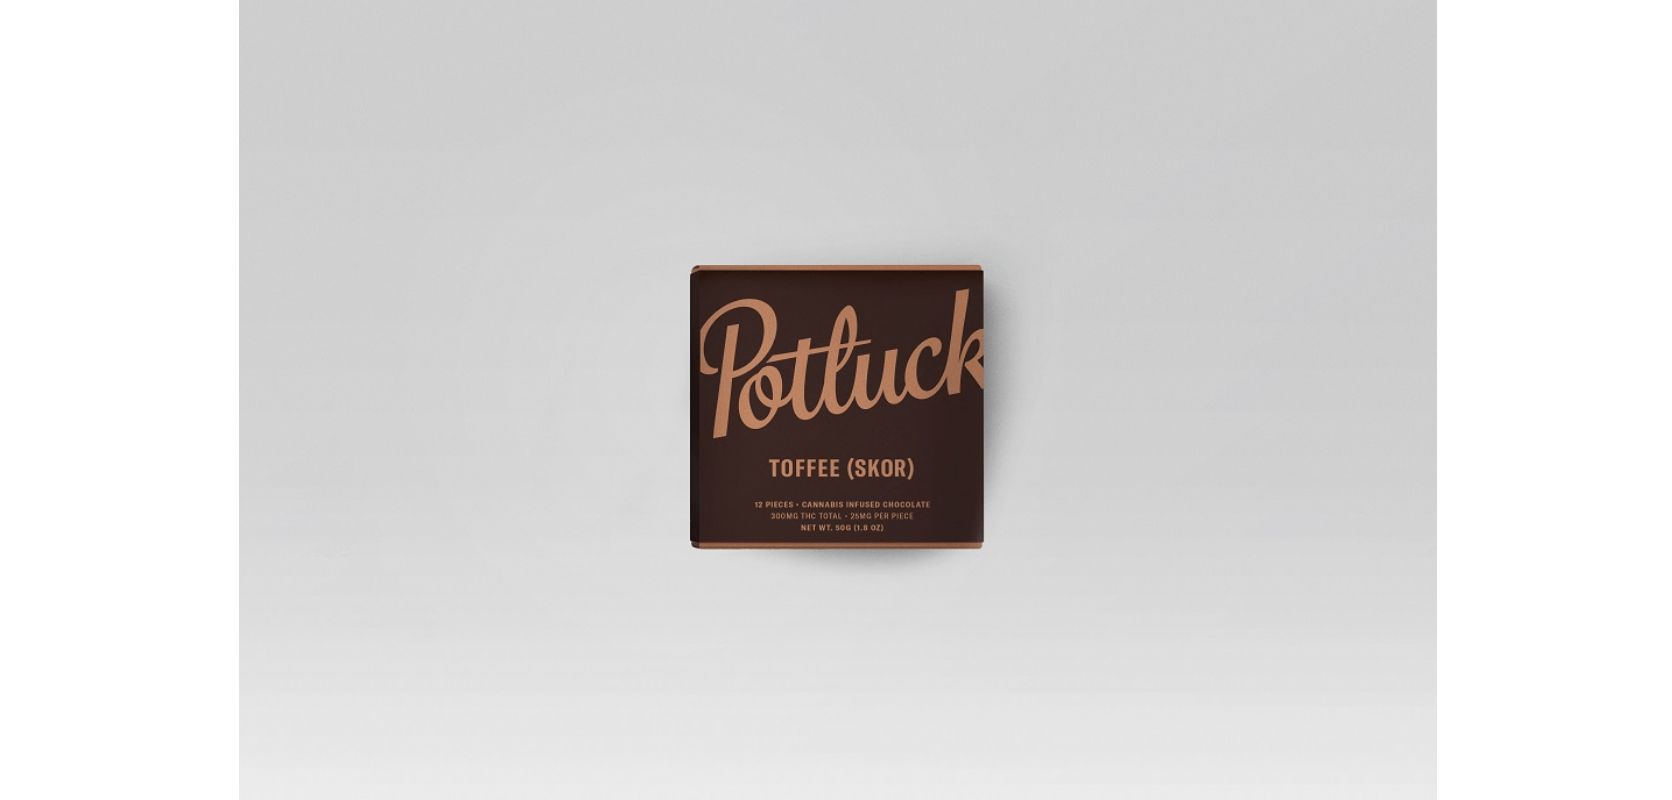 Potluck Chocolate - Toffeee 300mg THC has an all-natural, high-quality flavour that ensures you reap the therapeutic benefits of THC in an incredibly tasty cannabis-infused chocolate bar.